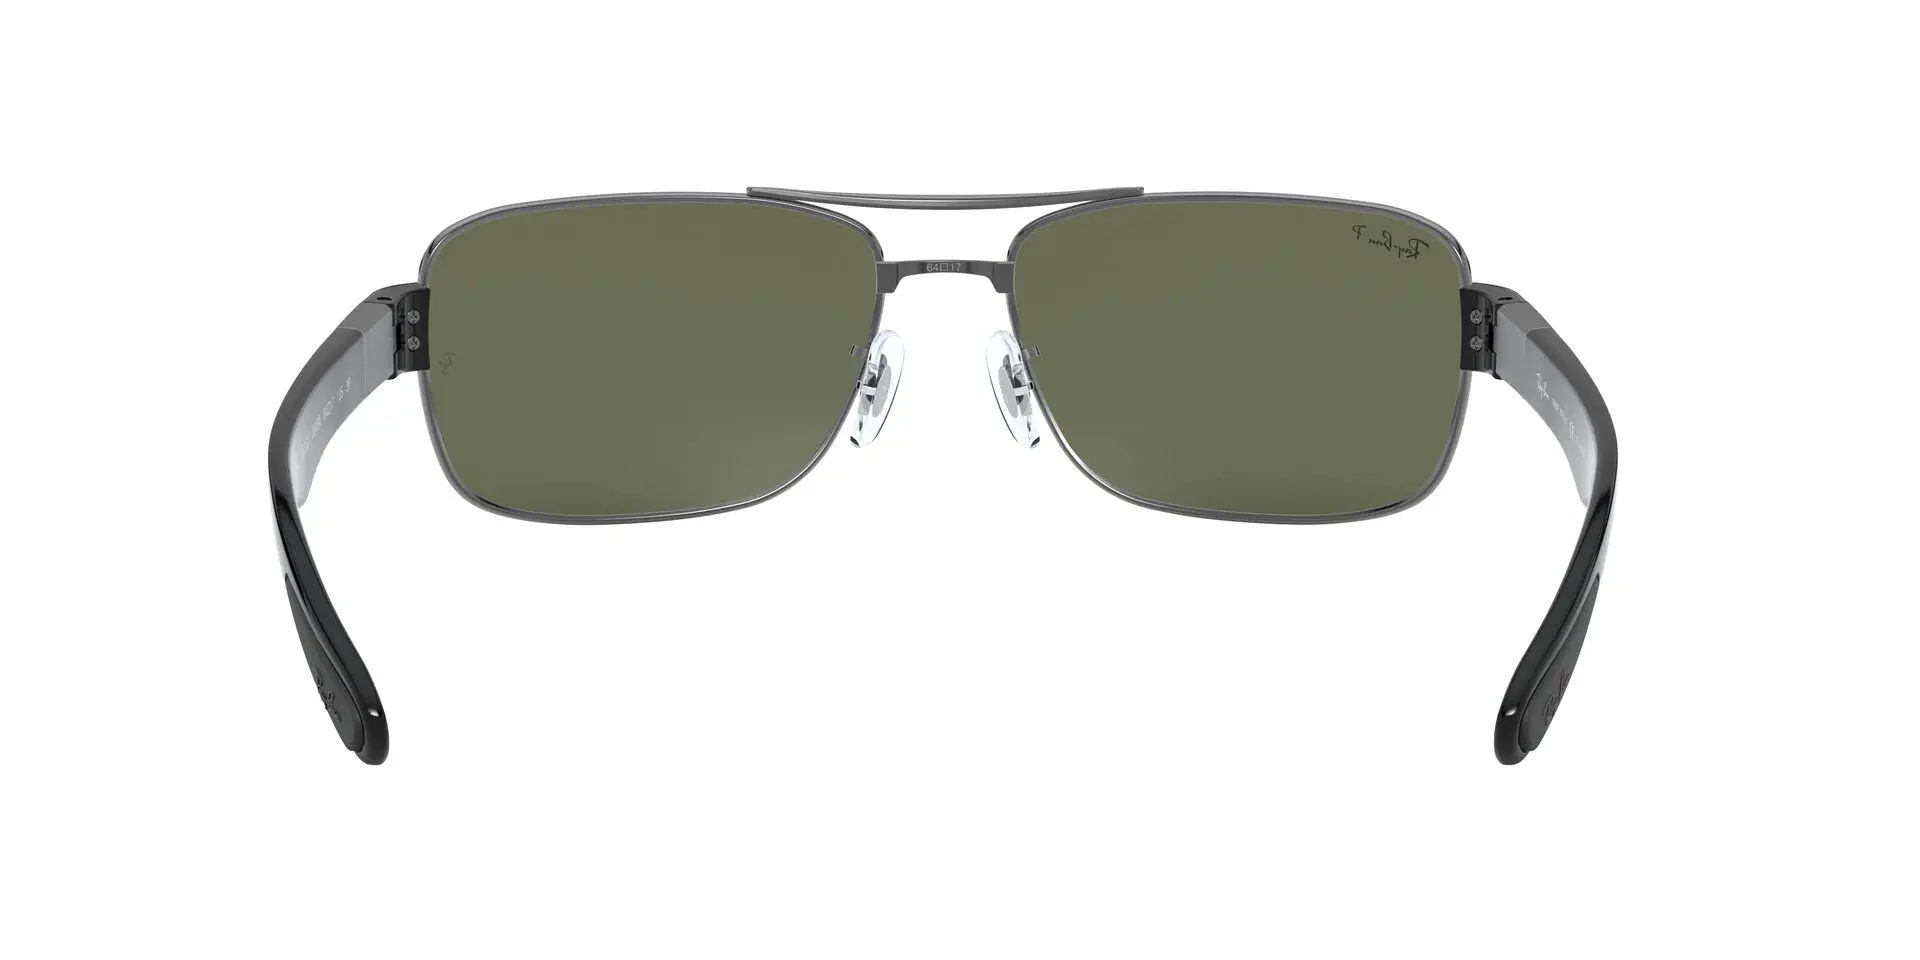 Ray-Ban RB3522 004/9A